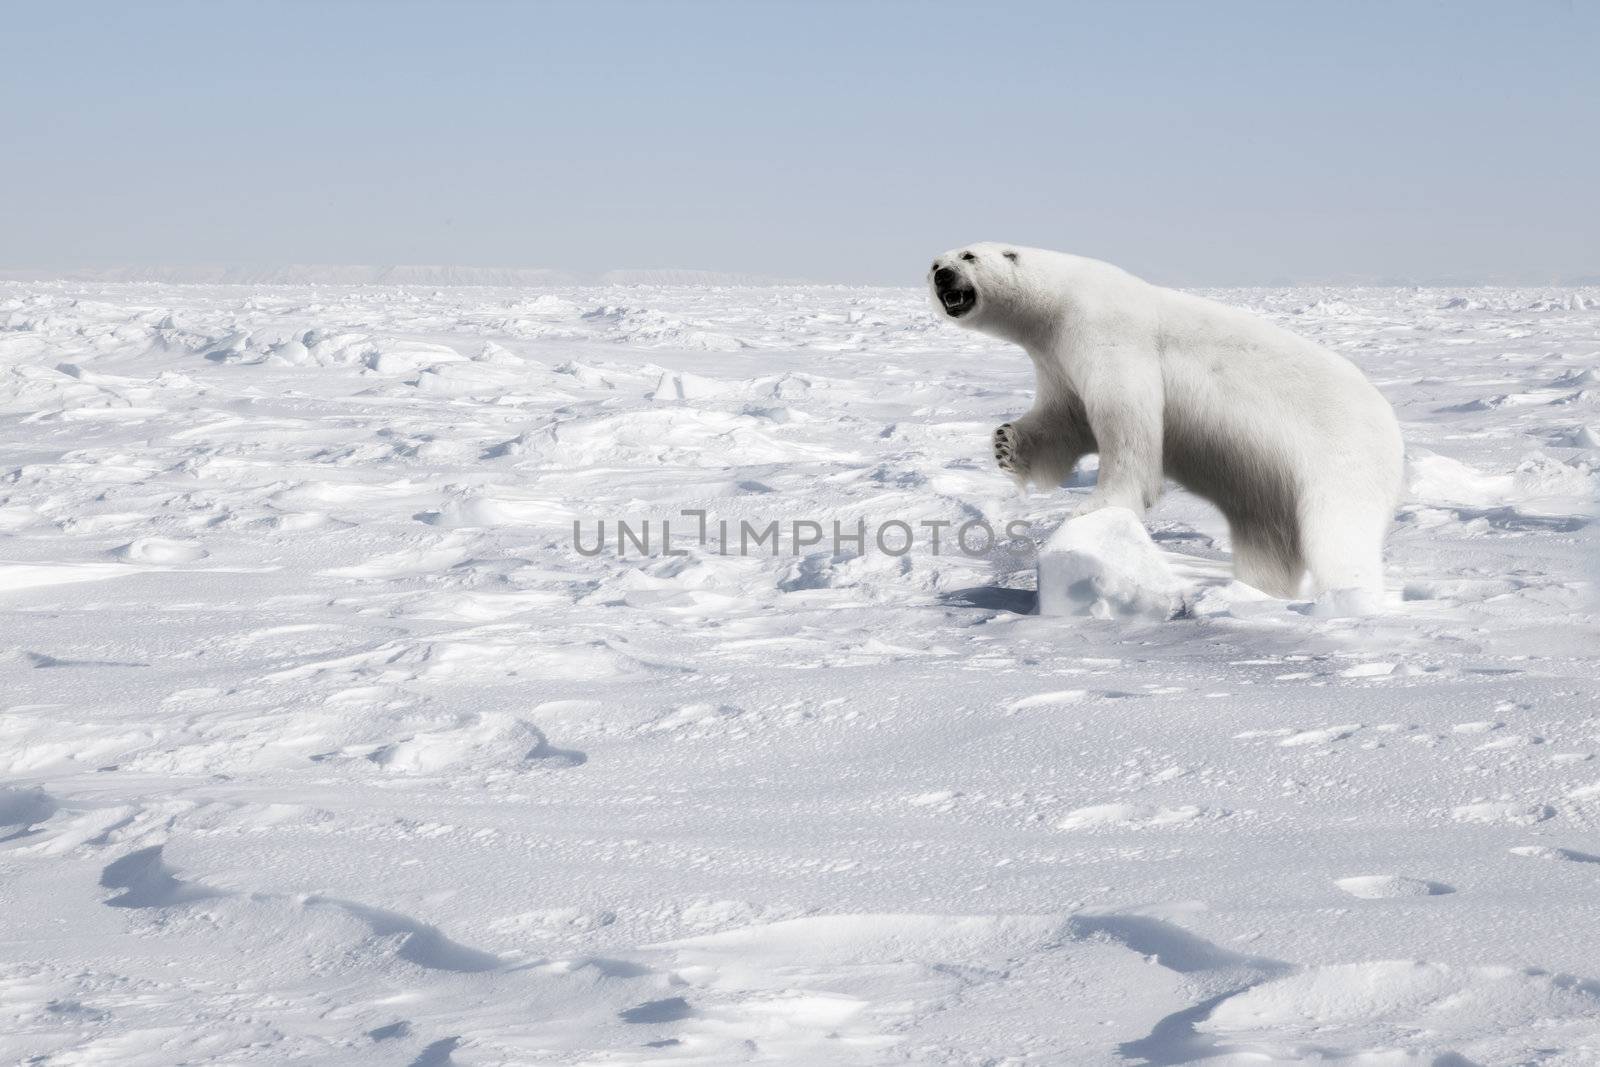 A polar bear in a natural landscape - Svalbard, Norway